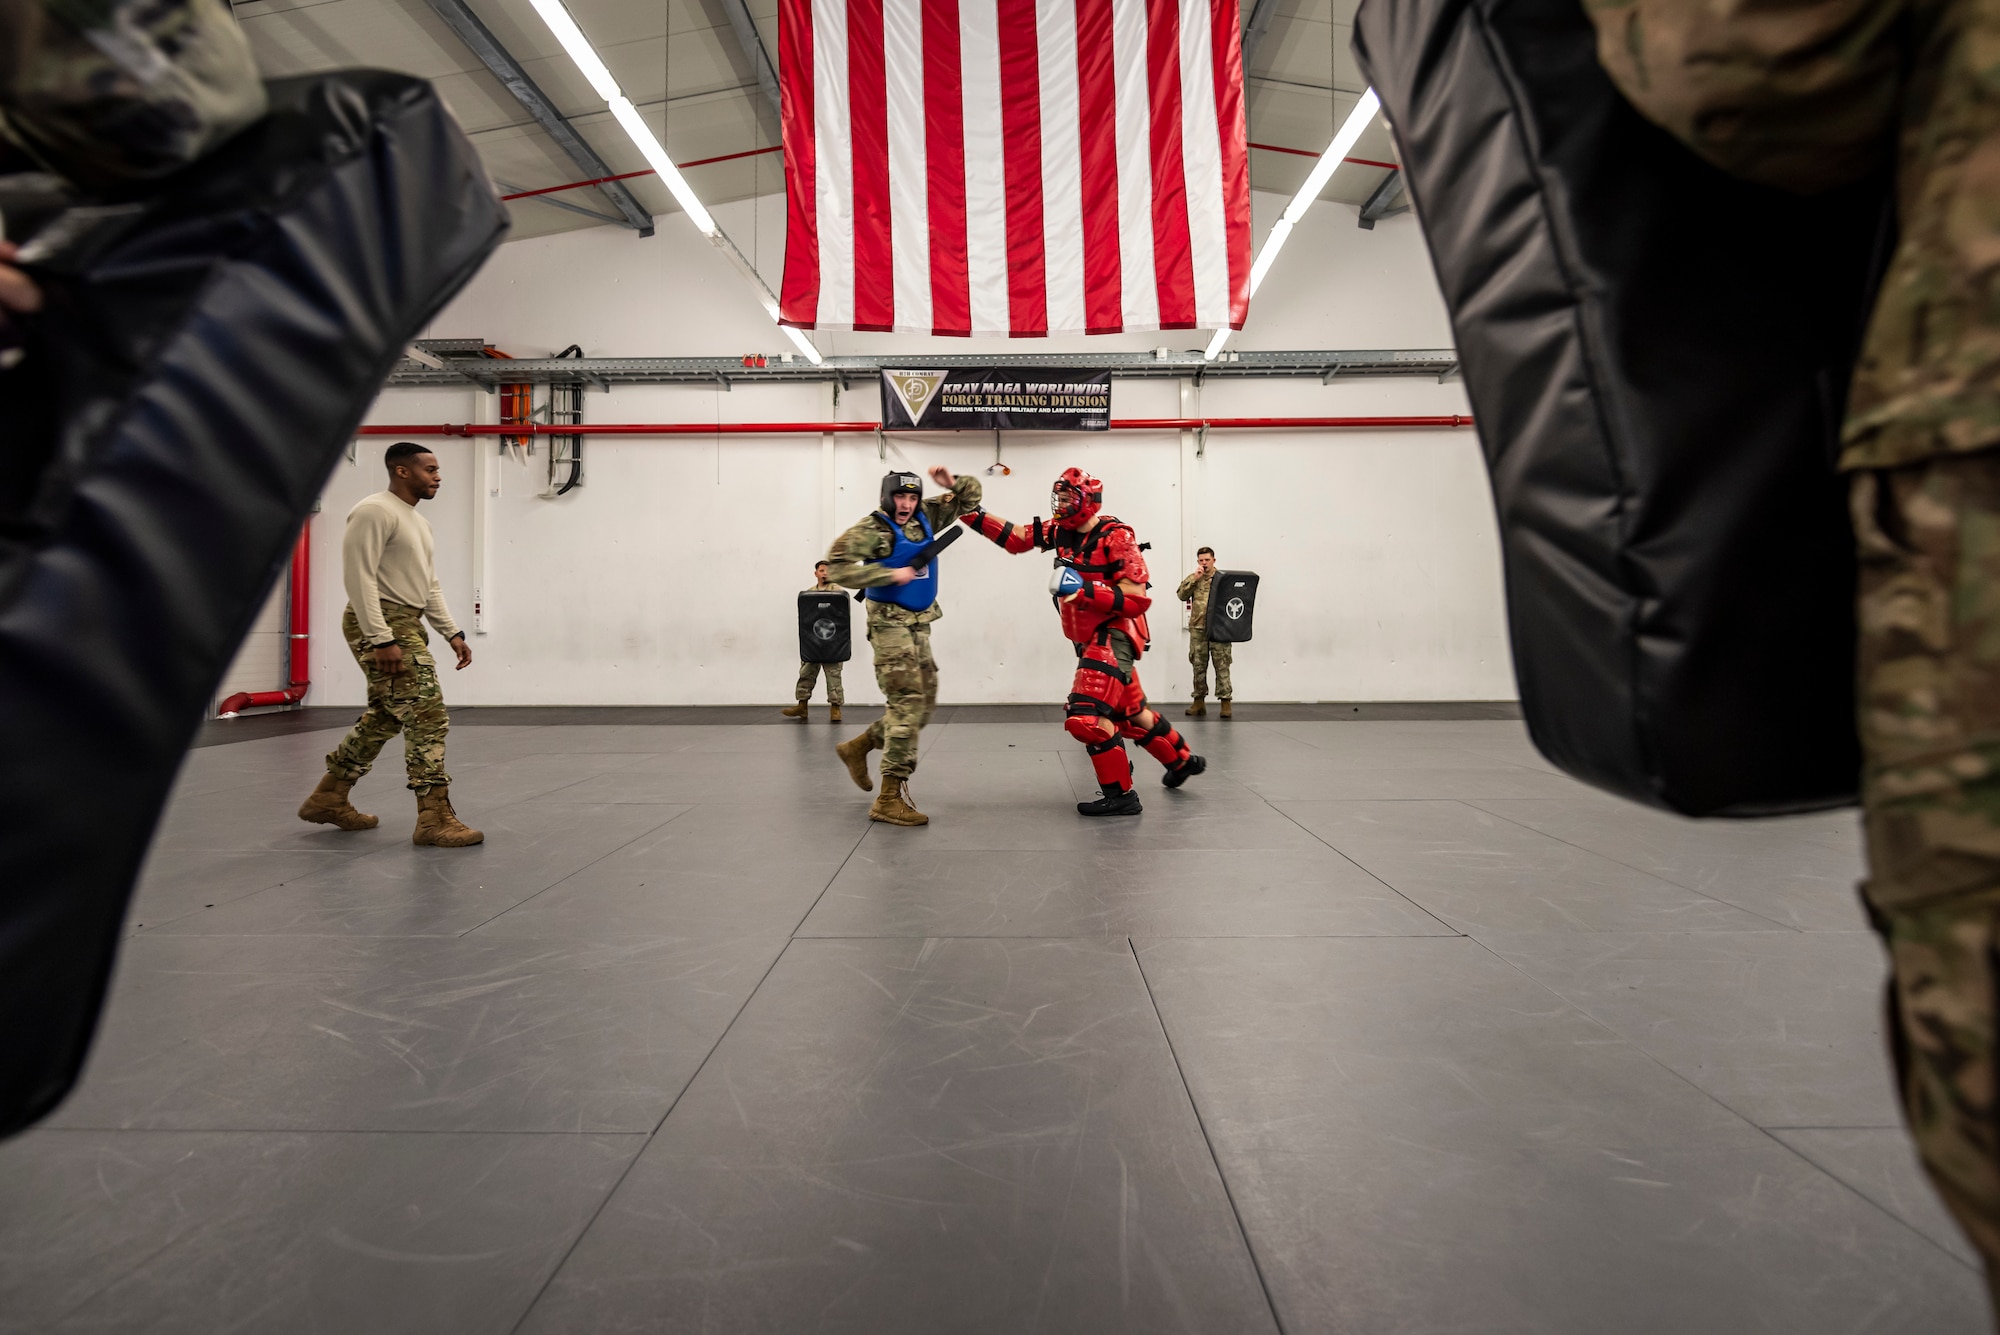 U.S. Air Force Airmen spar during a Leader Led Training Course at Ramstein Air Base, Germany, Dec. 7, 2019. Airmen sparred during the course to learn advanced fighting techniques and to learn how to teach those techniques within their home station flights. (U.S. Air Force photo by Staff Sgt. Devin Nothstine)